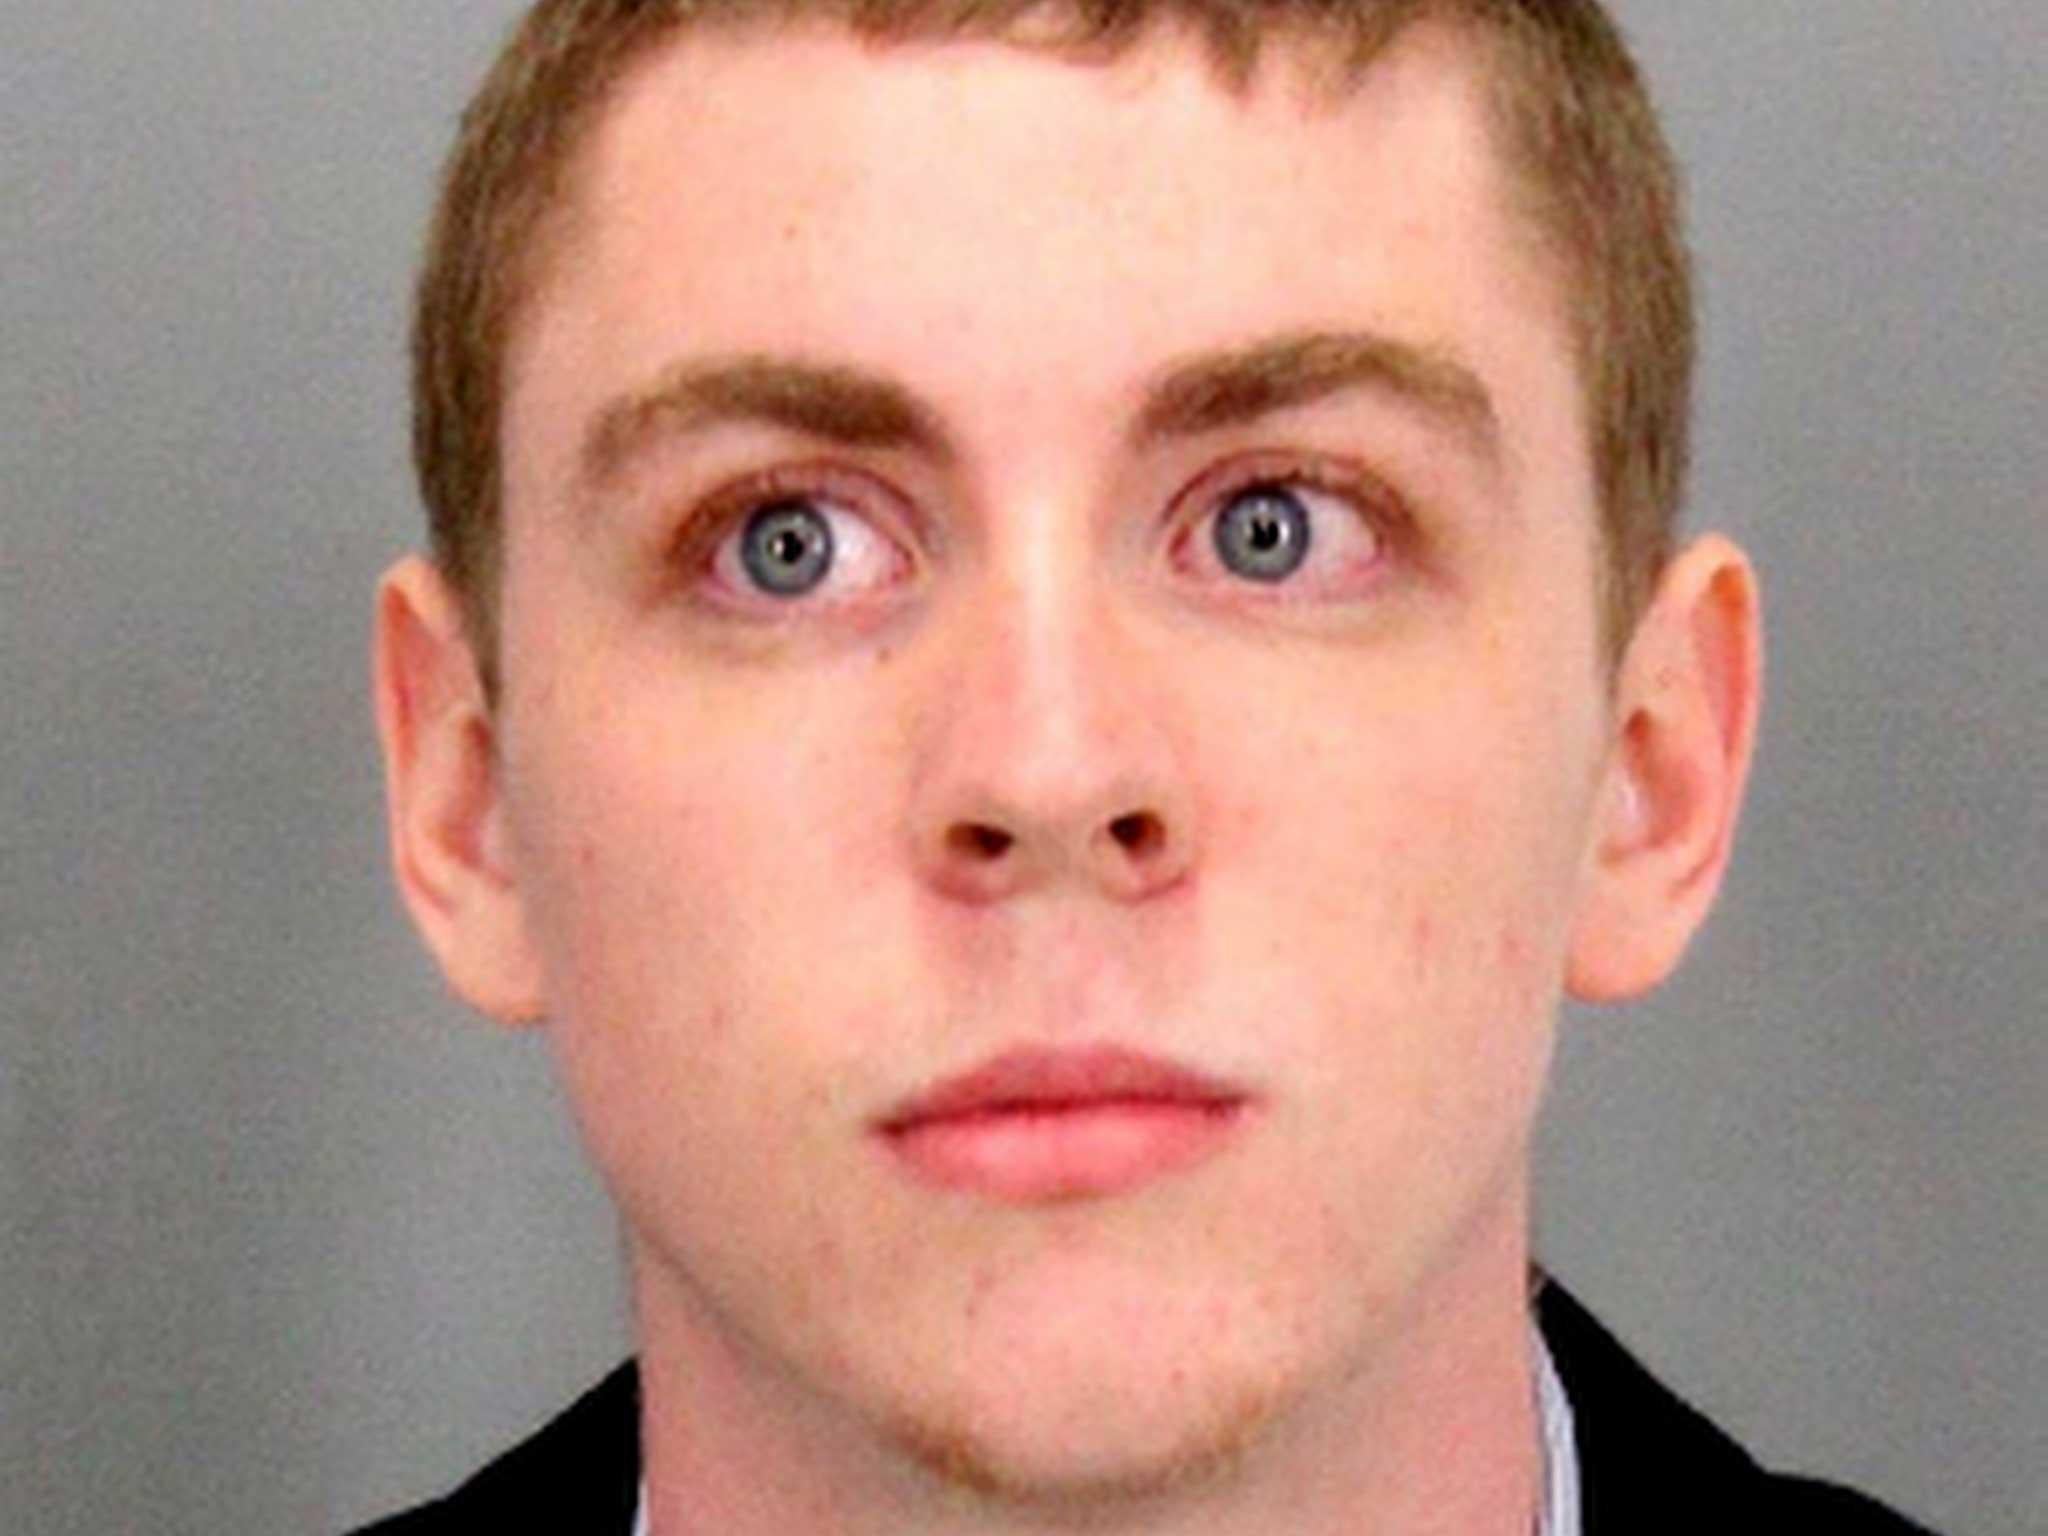 Brock Turner, aged 20, was found guilty of three felony sexual assault charges